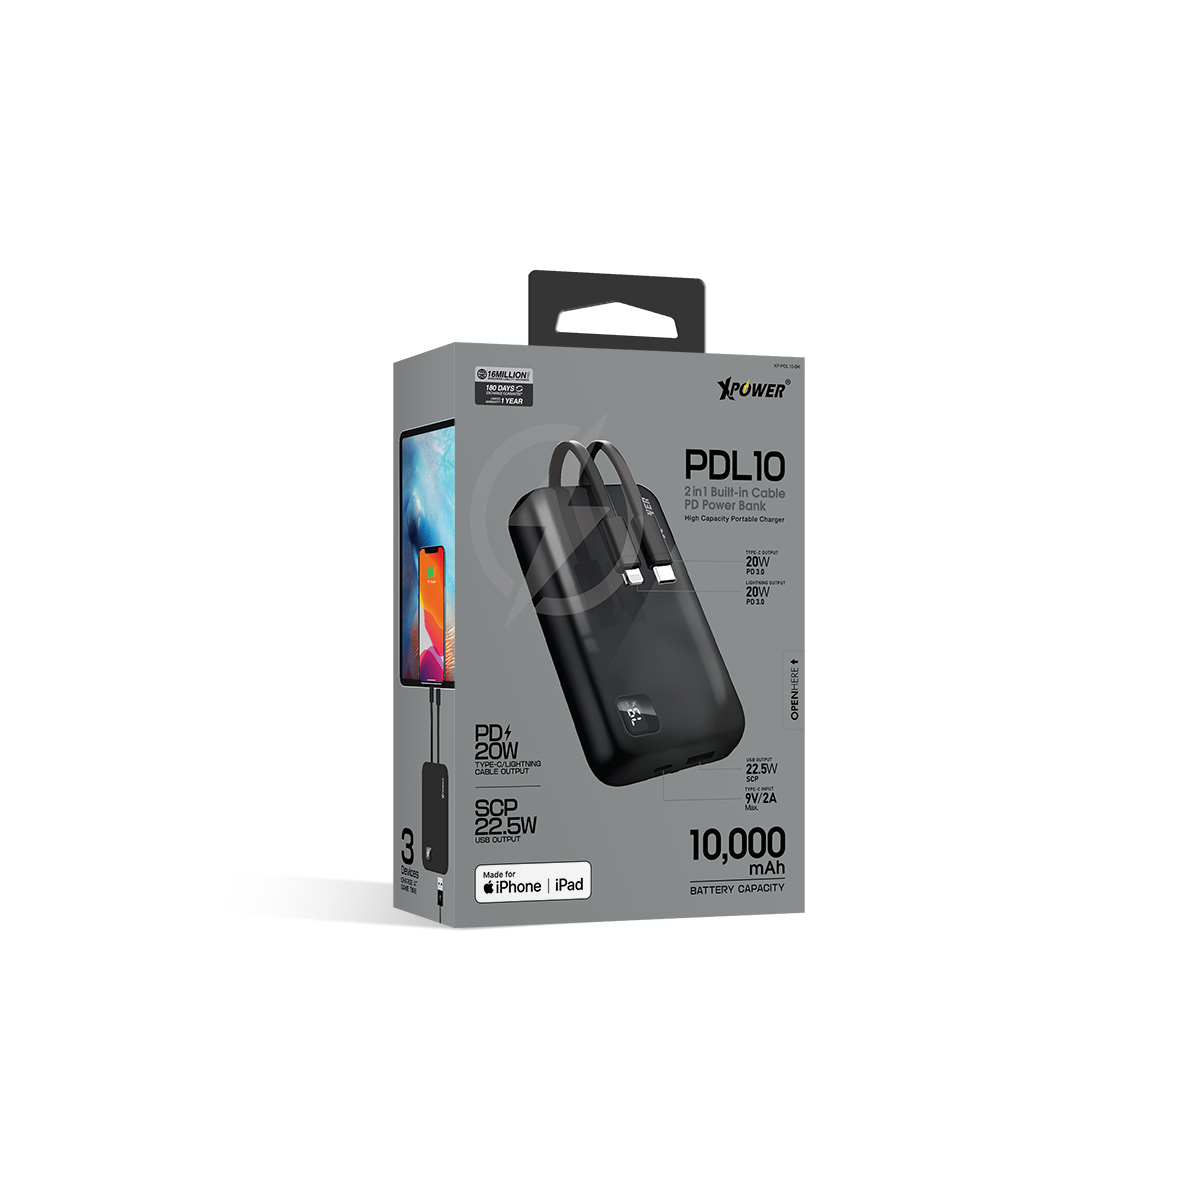 XPower PDL10 2 IN 1 PD 3.0 POWER BANK (Apple MFi certified) (BLACK), , large image number 0